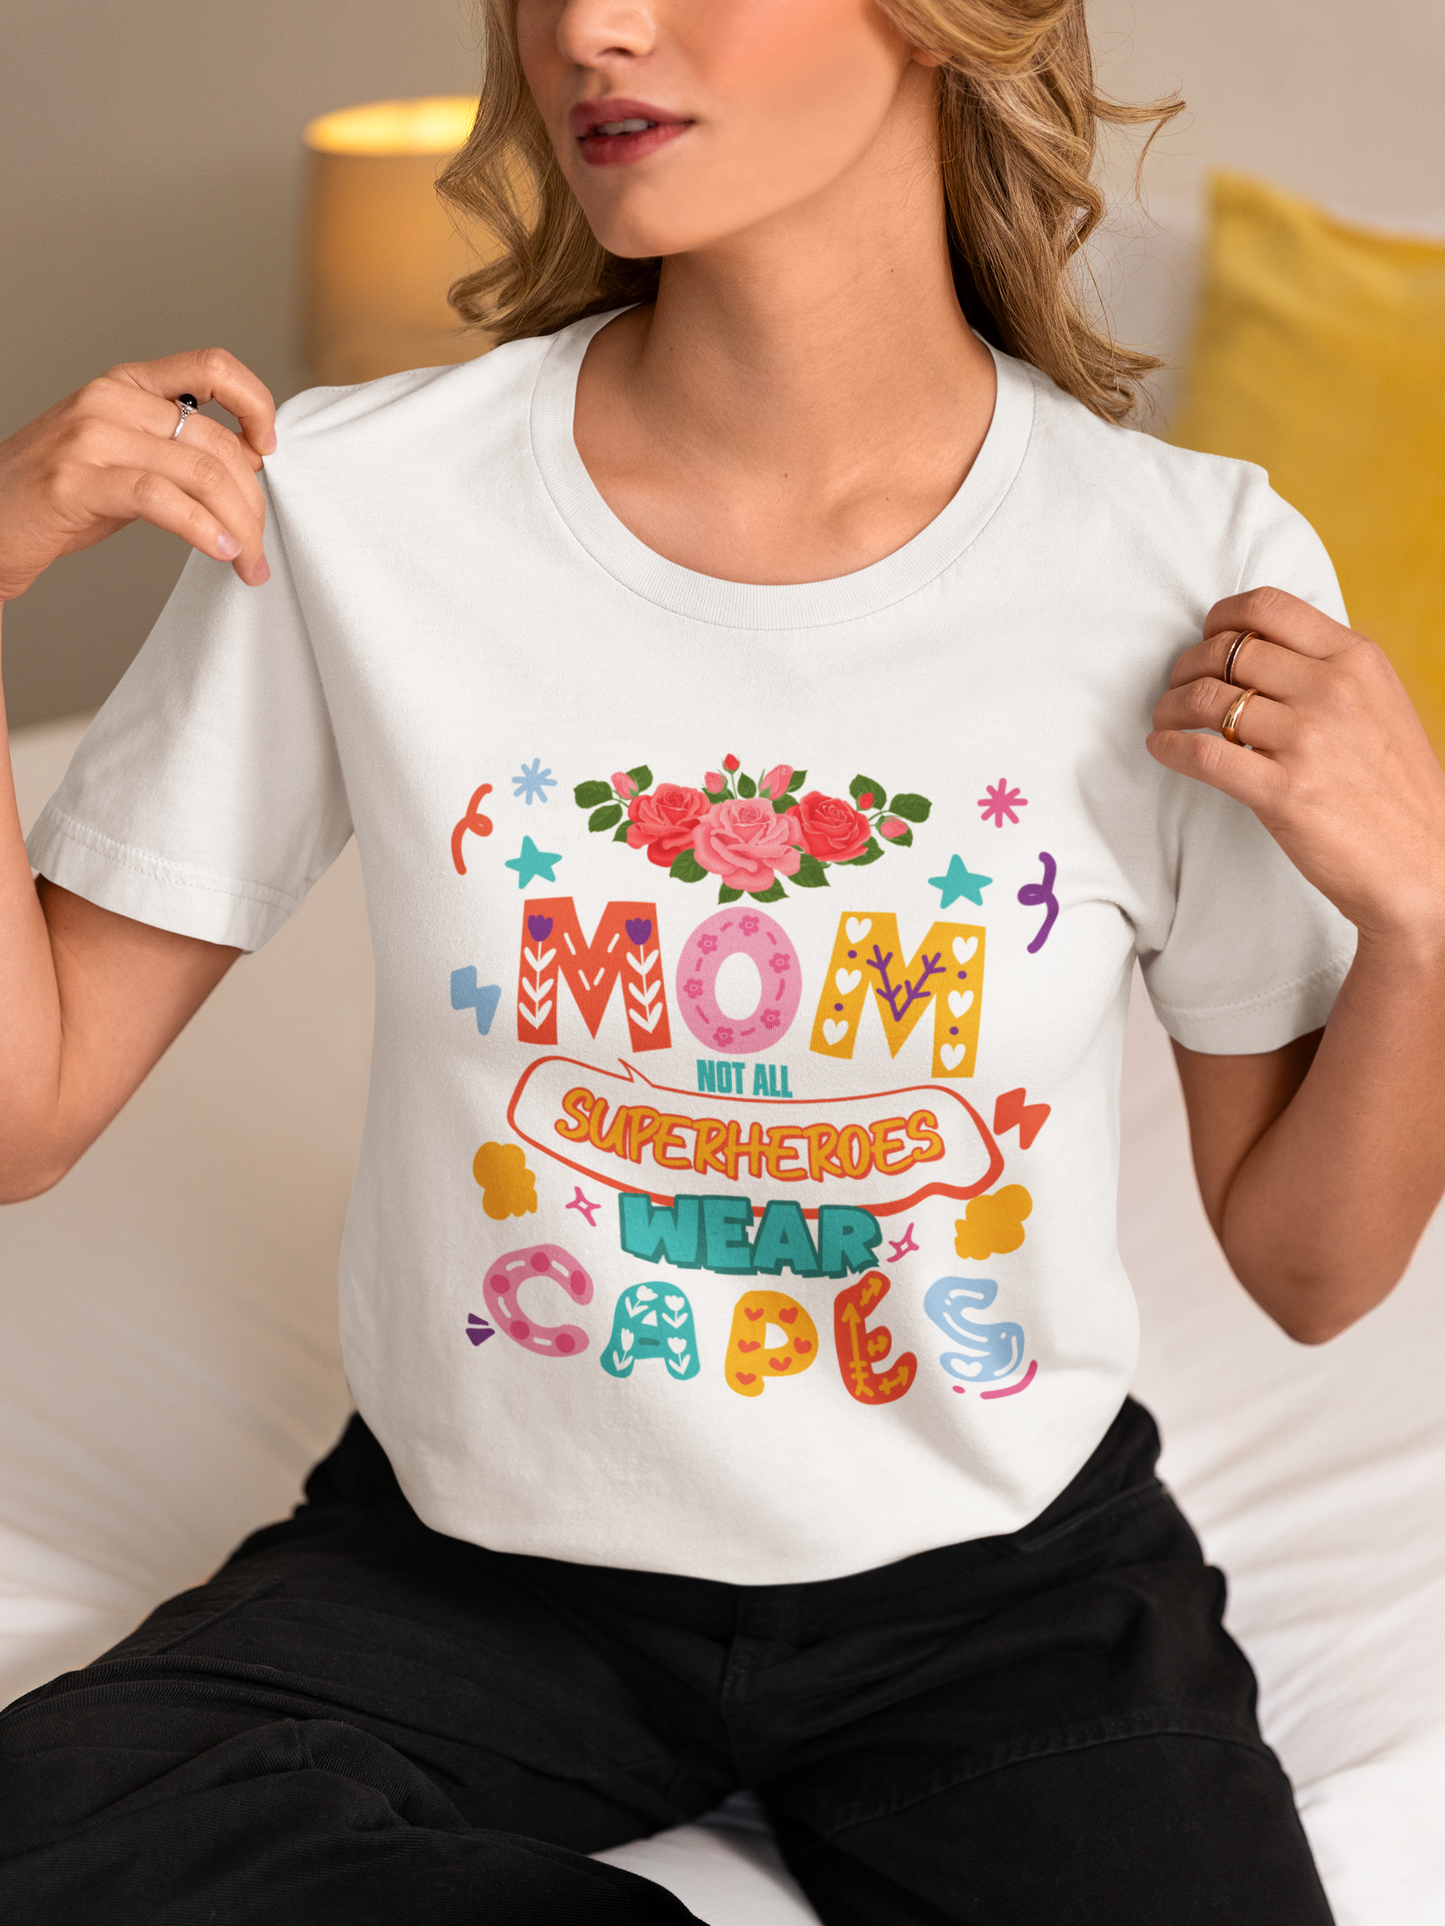 Not All Mom Superheroes Wear Capes Shirt, Funny Quote Mother's Day Shirt, Floral For Mother's Day, Mother's Day Shirt, Sarcastic Quote For Mom Shirt, Best Mother's Day Gift Idea, Mama Shirt, Colorul Mother's Day Shirt, Mommy Shirt